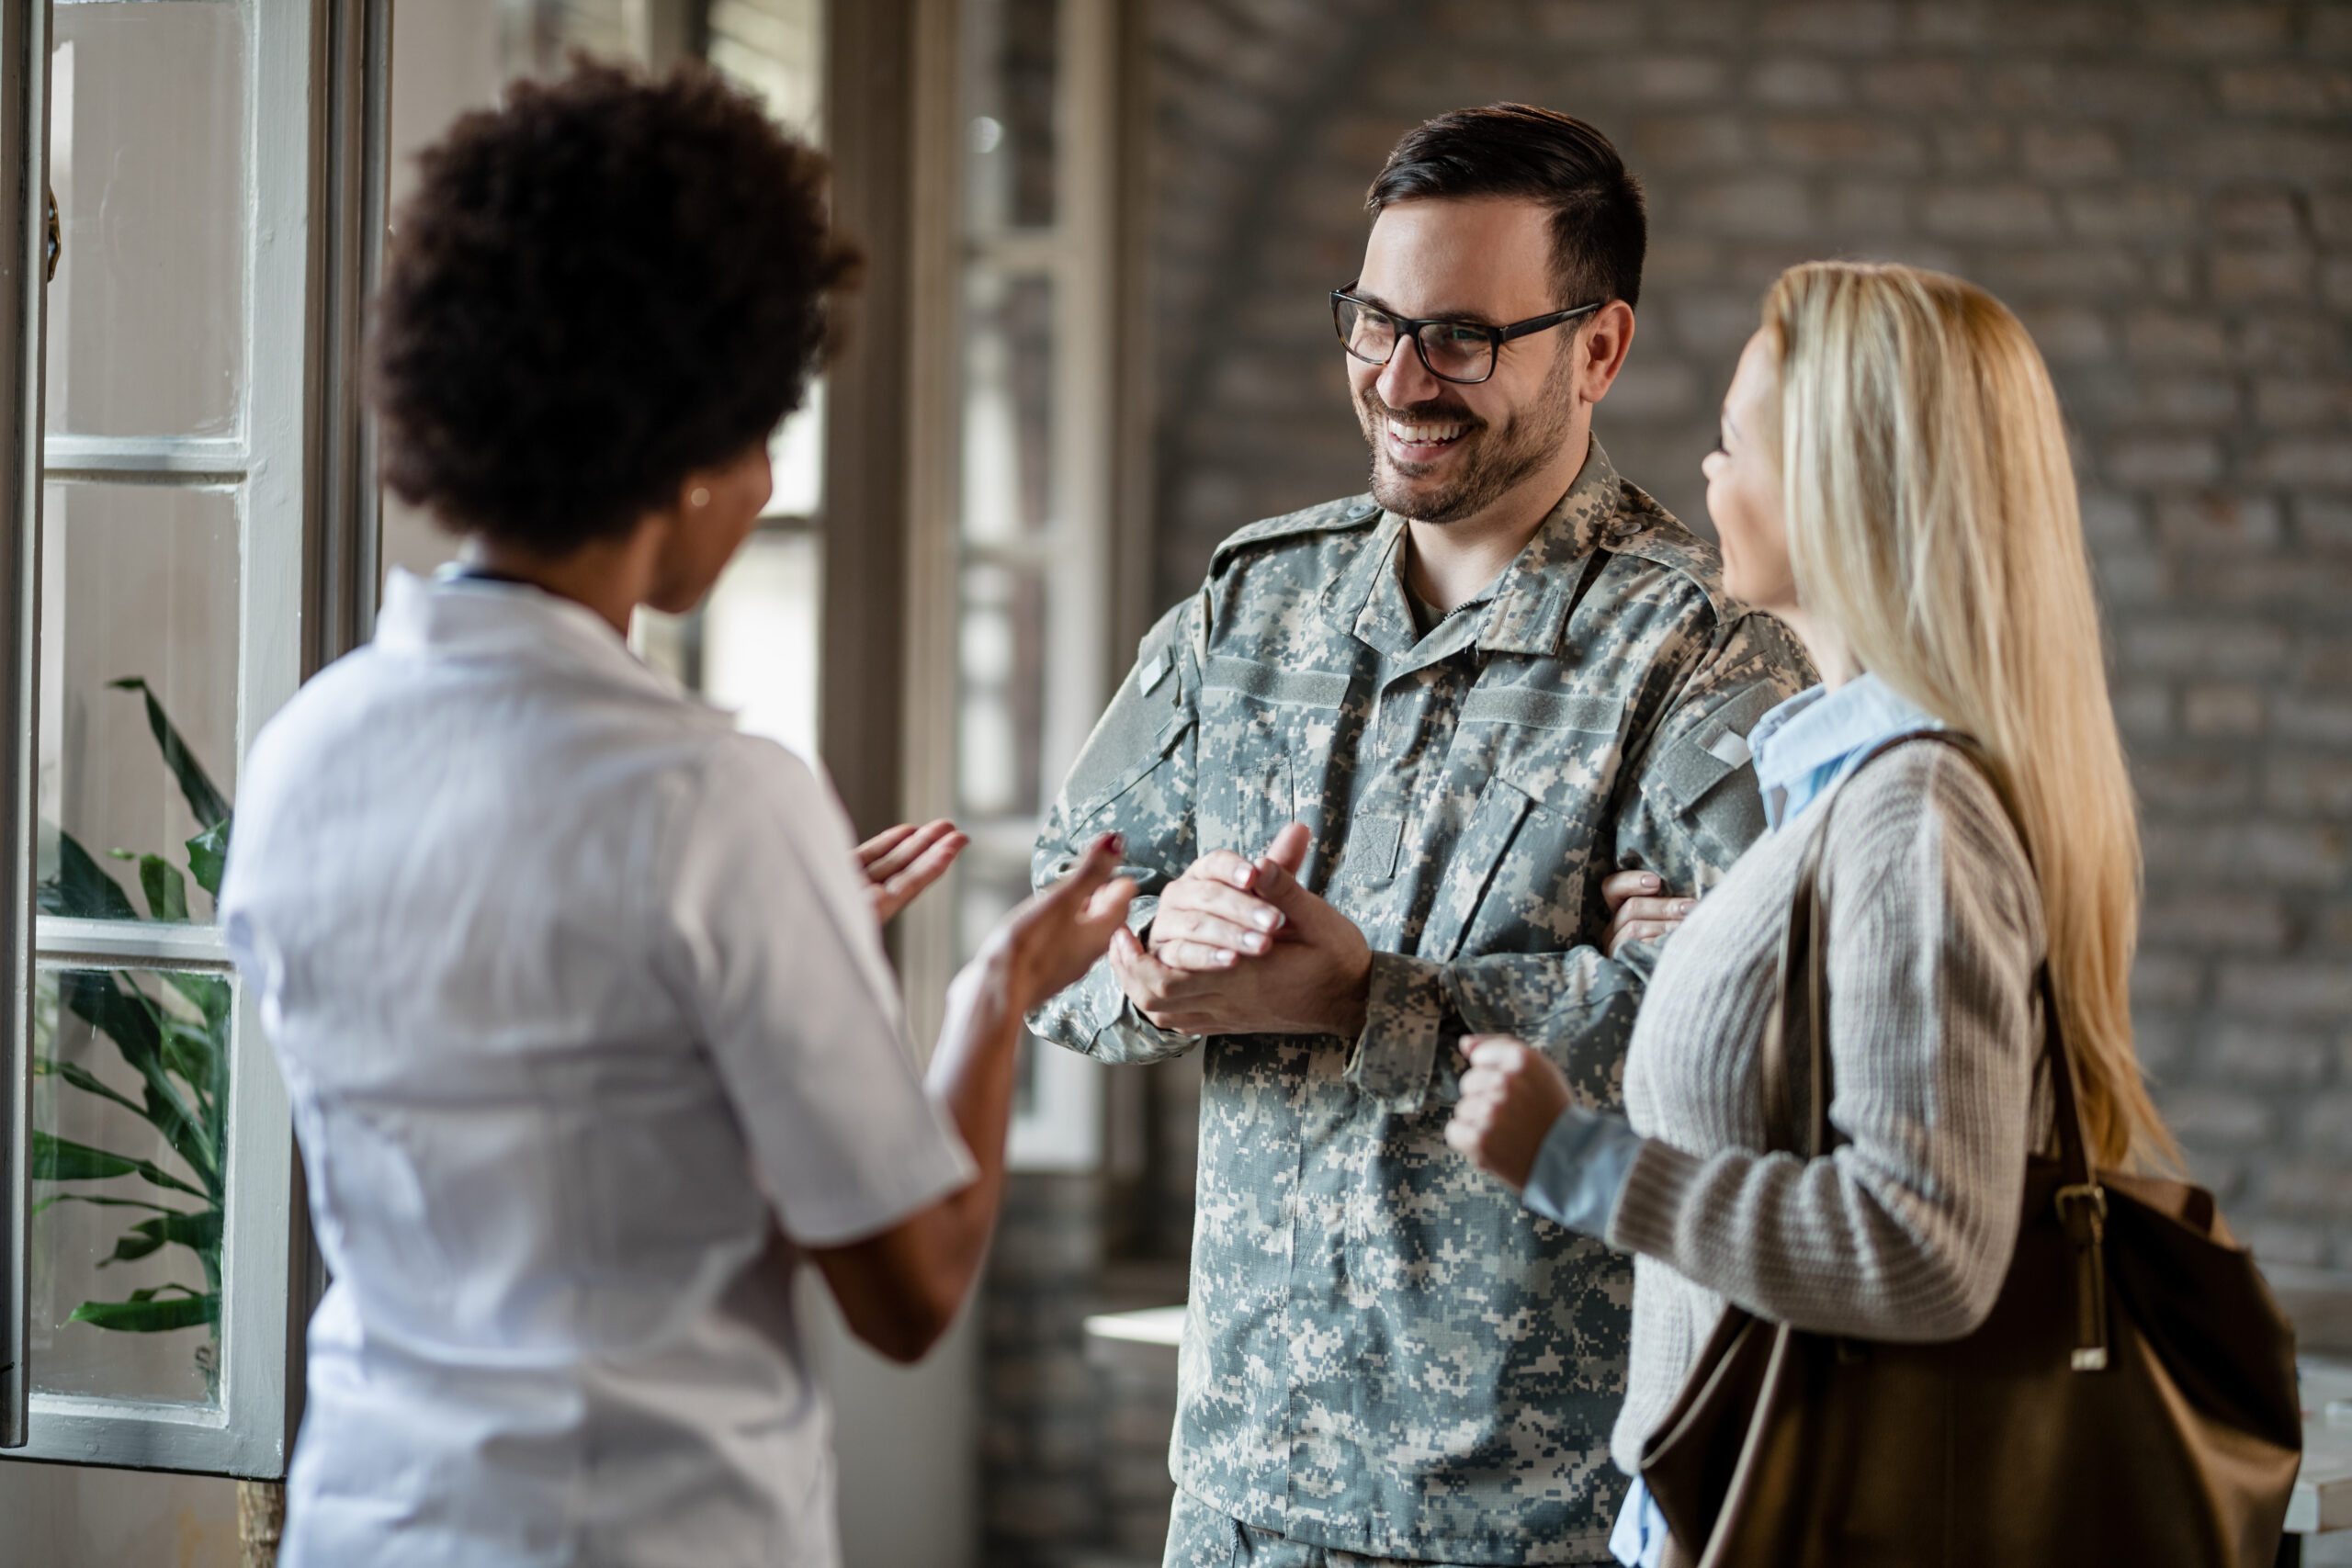 How to Support Military Members and Veterans During COVID-19